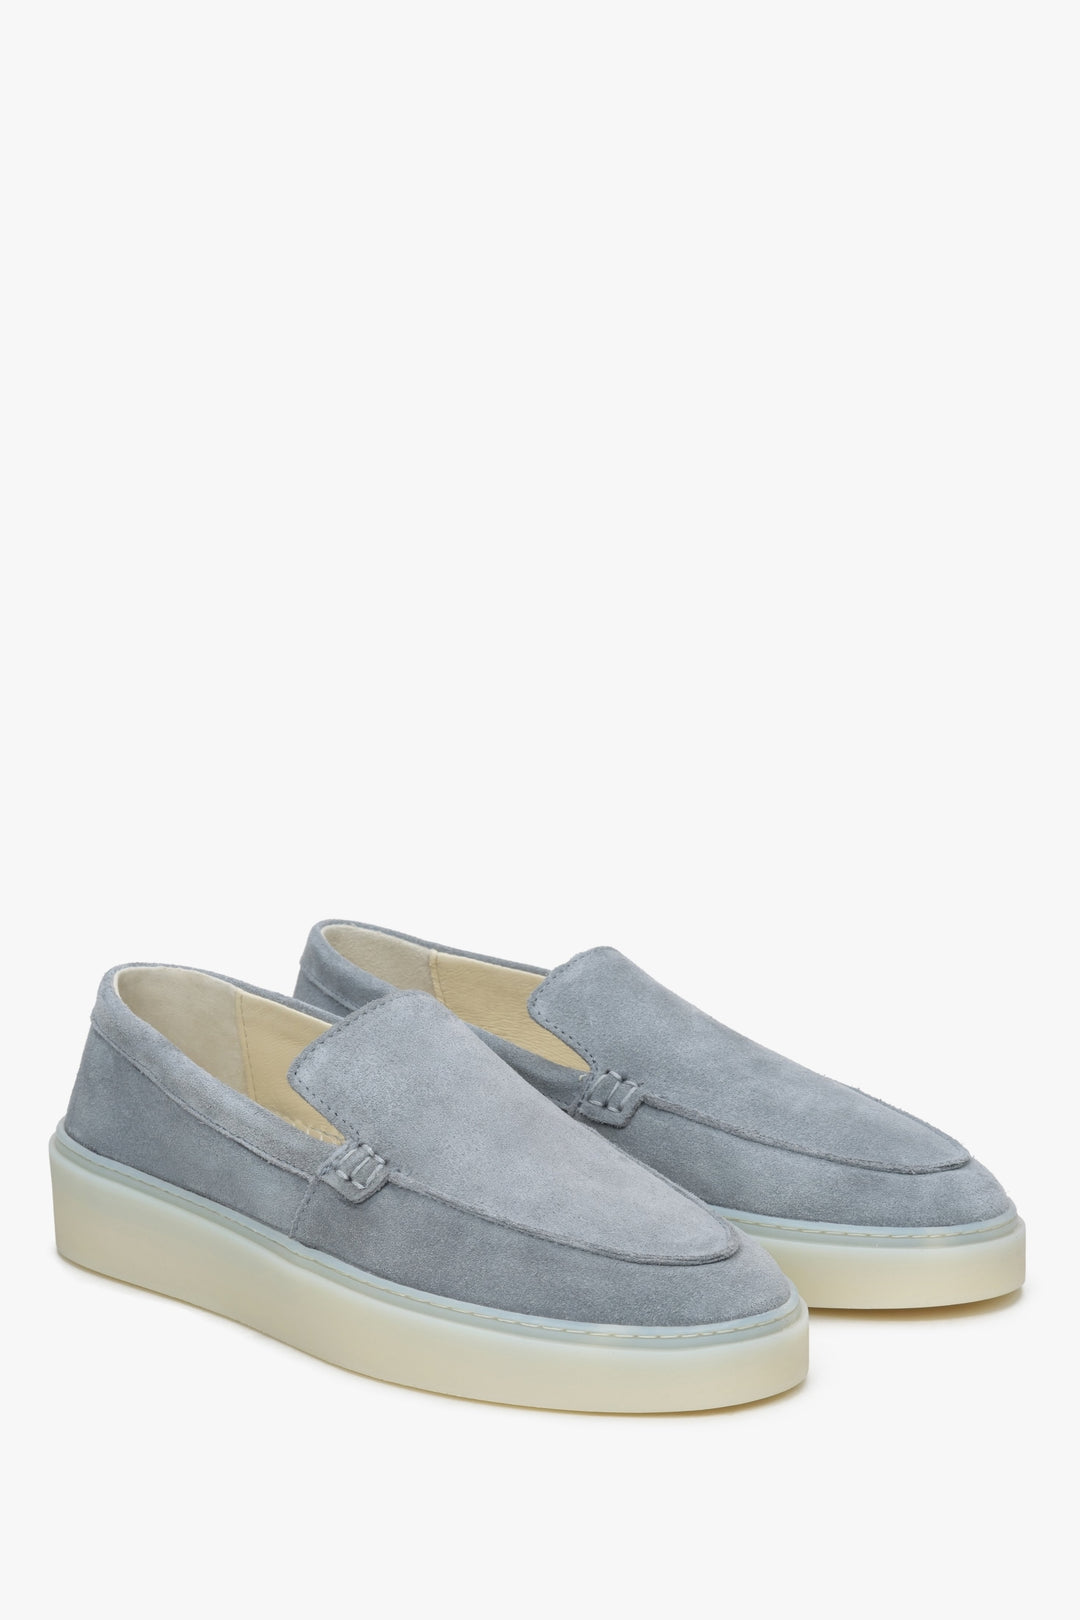 Women's grey velour loafers.